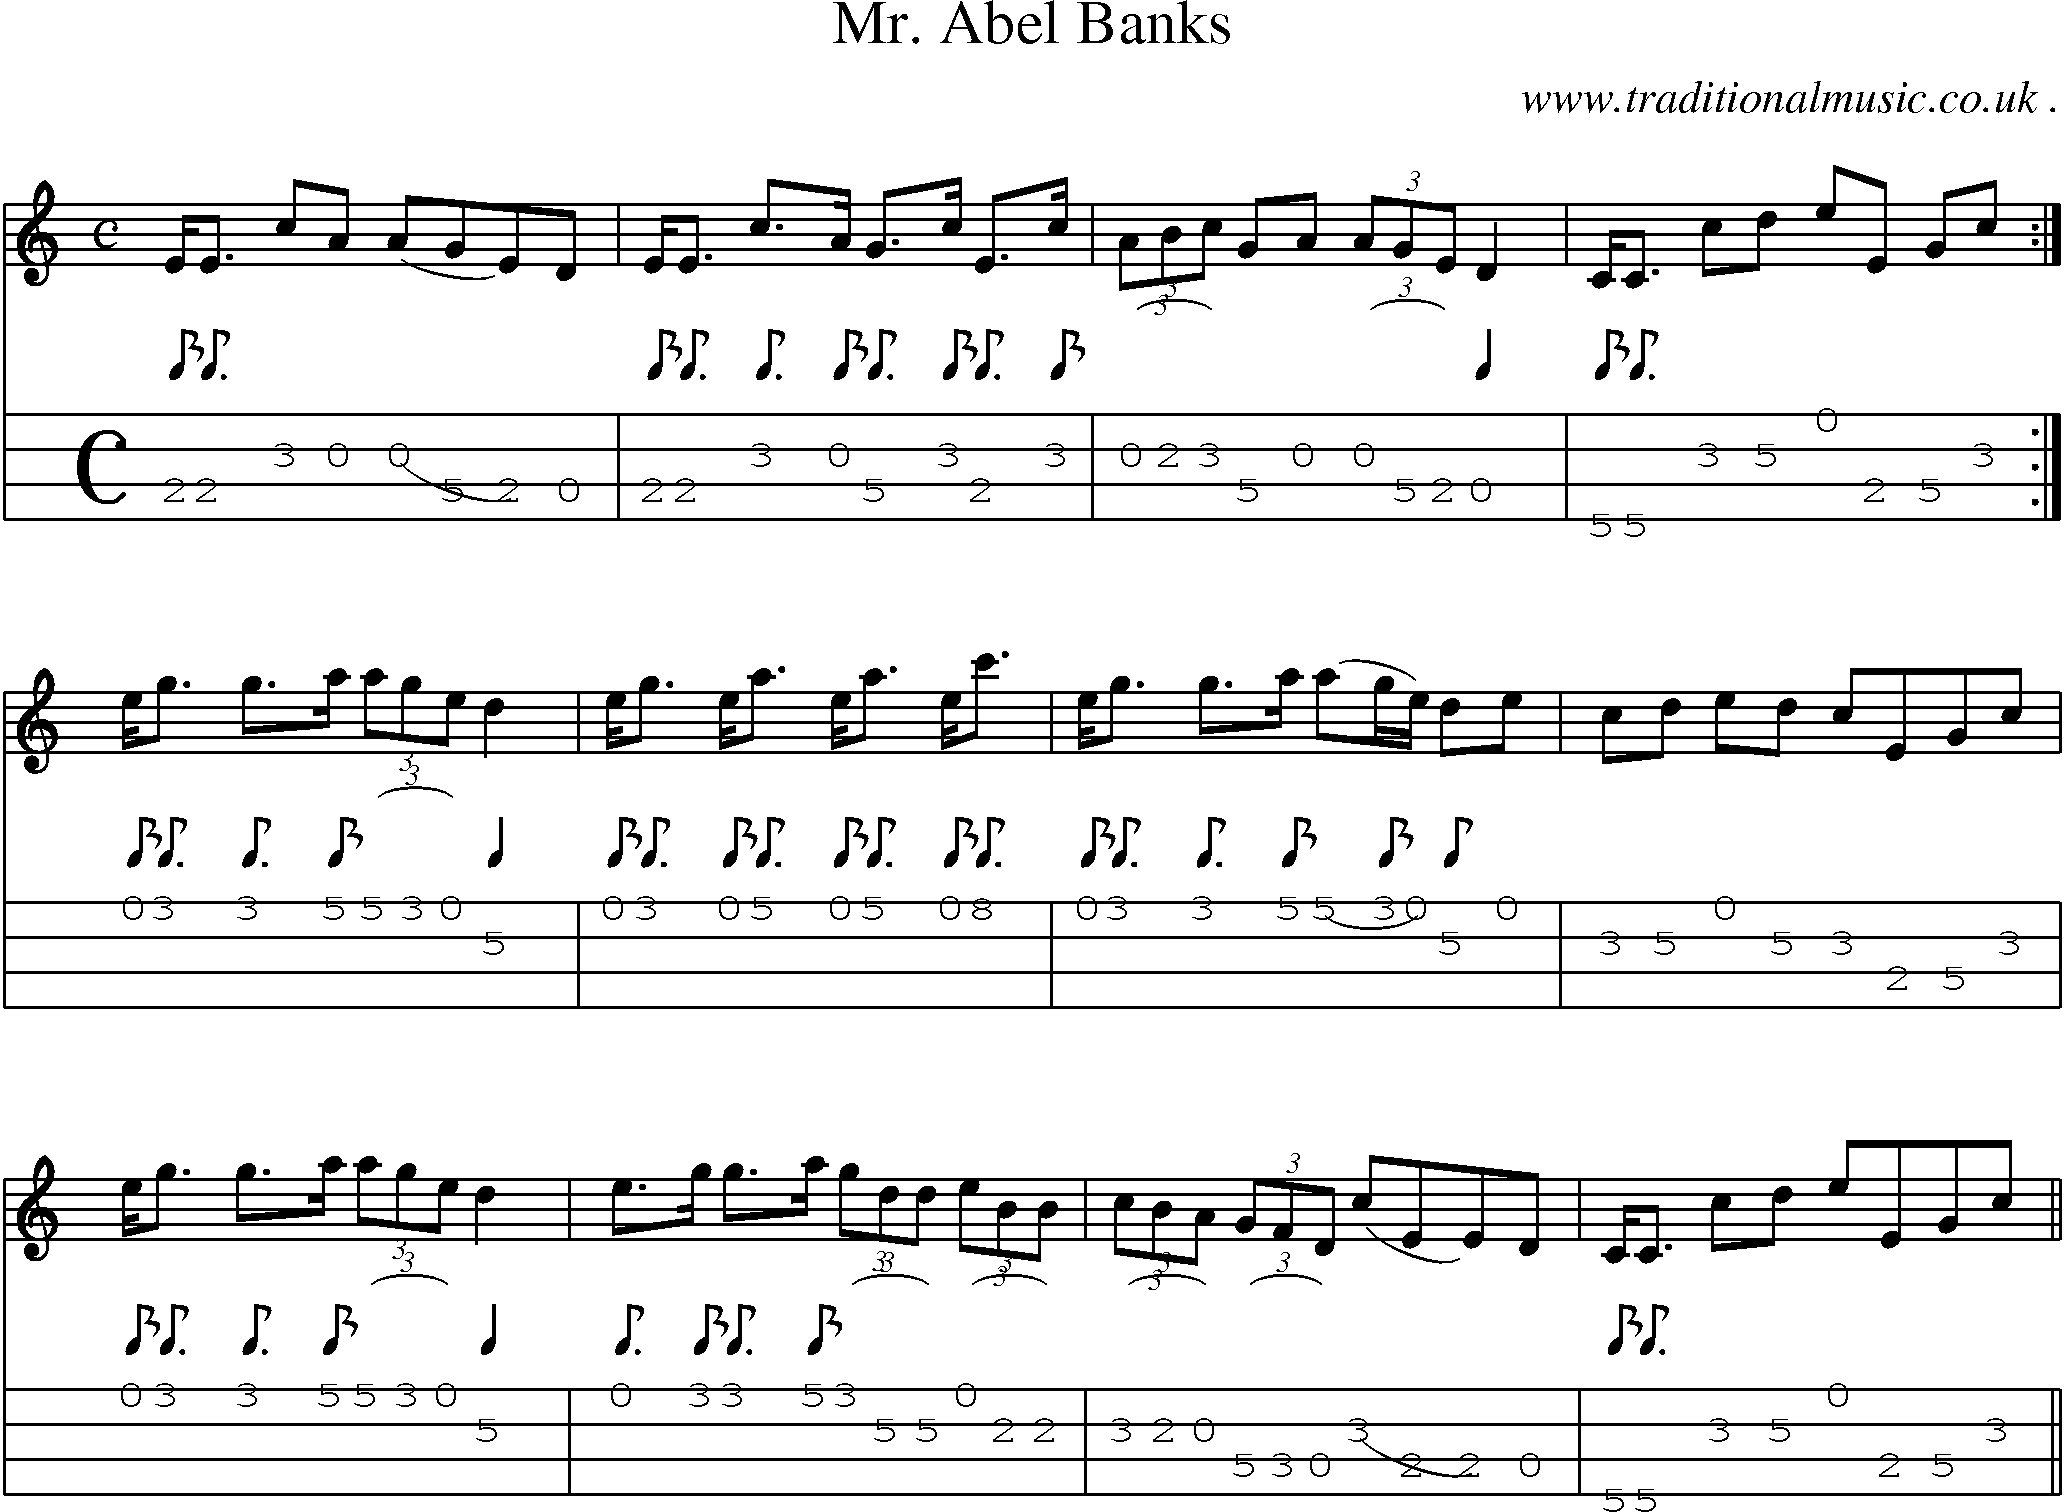 Sheet-music  score, Chords and Mandolin Tabs for Mr Abel Banks